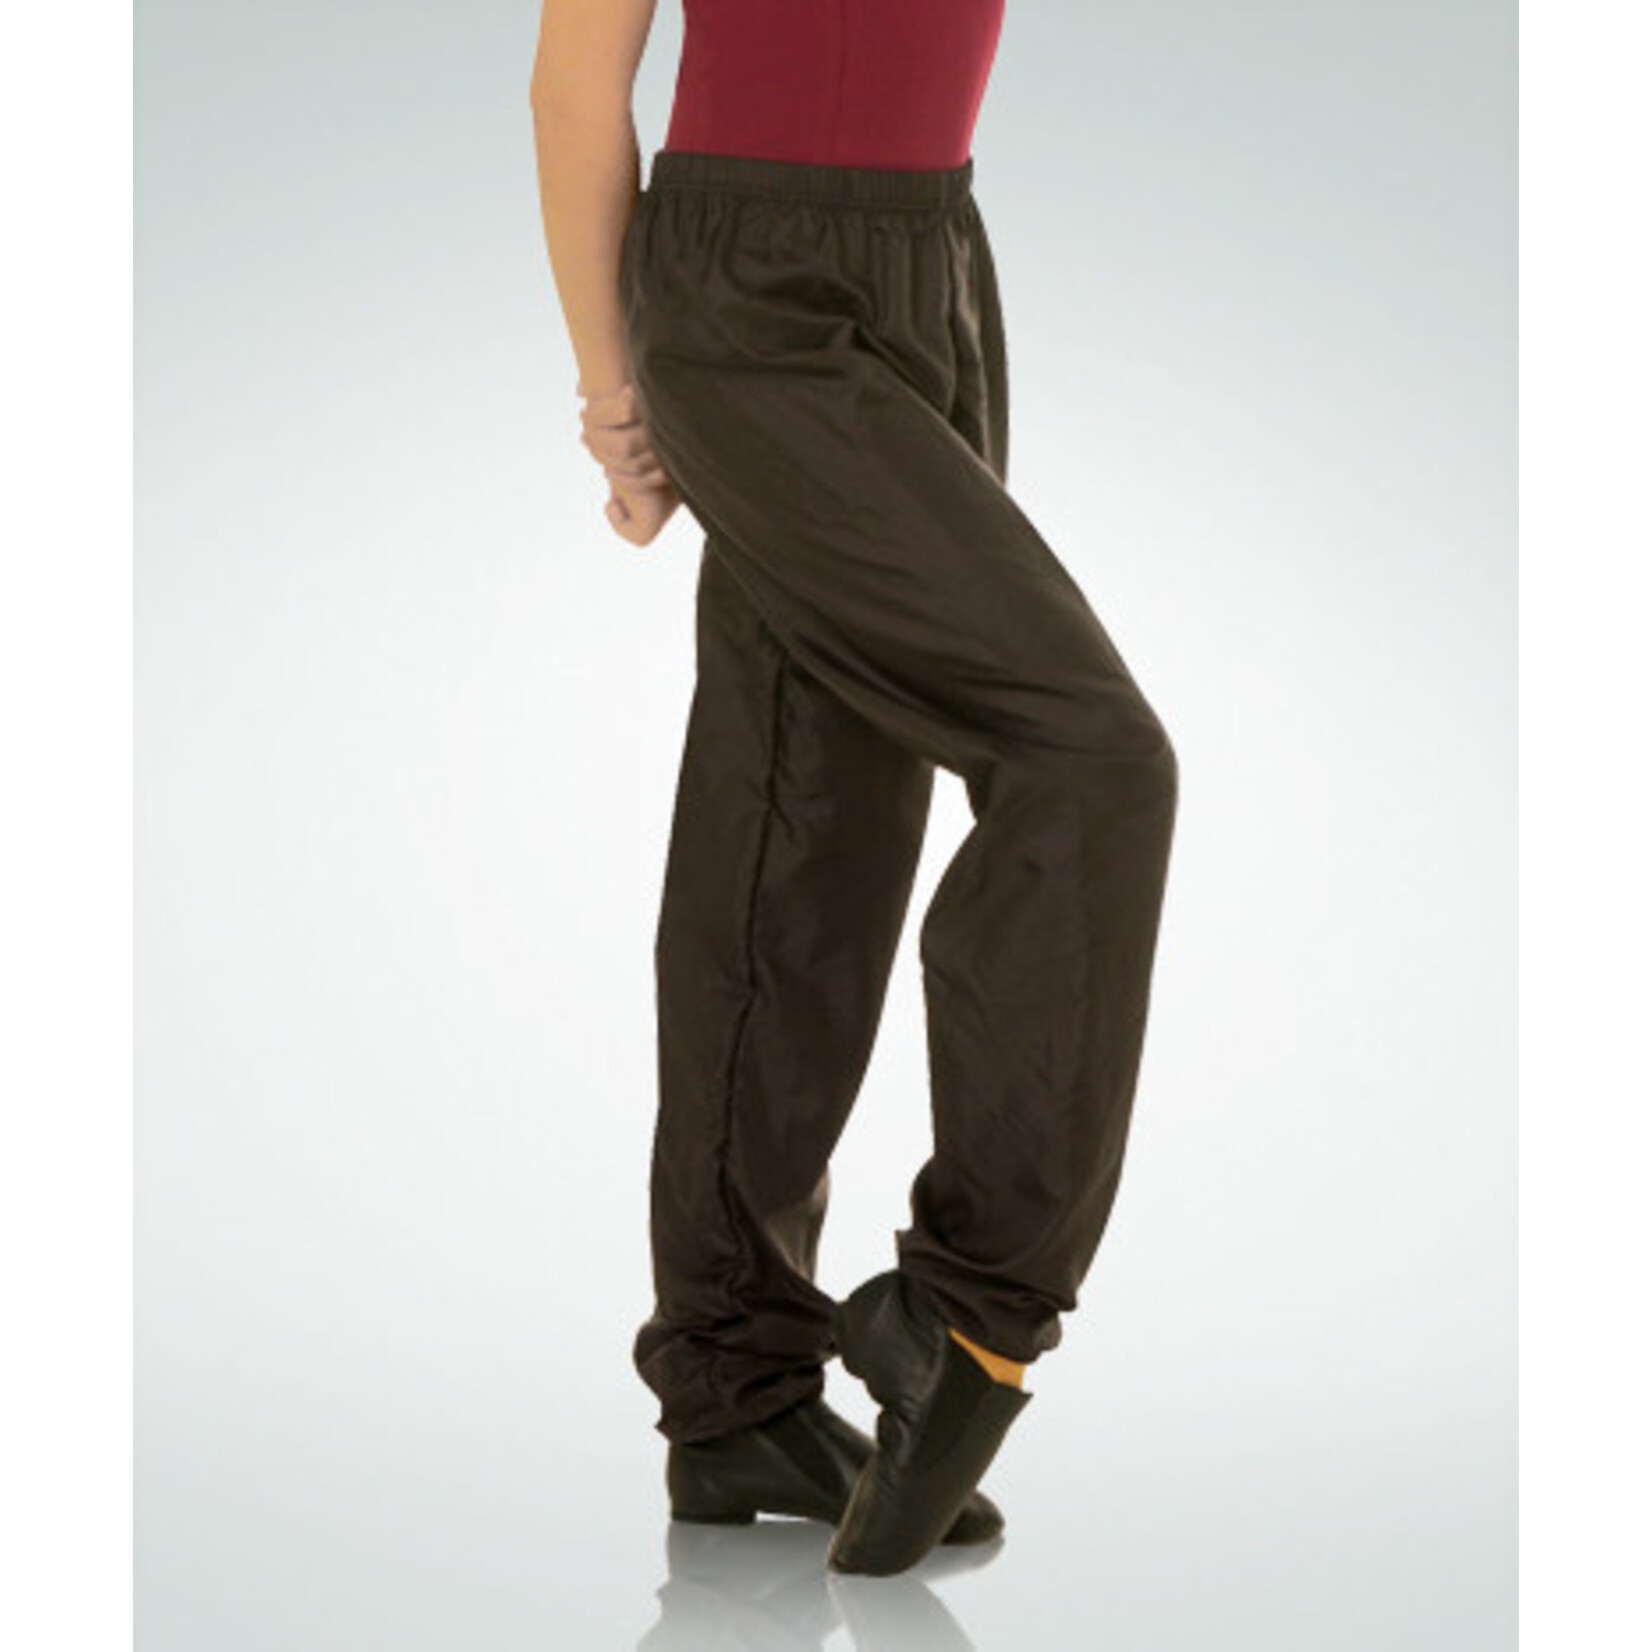 Body Wrappers 701 Ripstop Pant